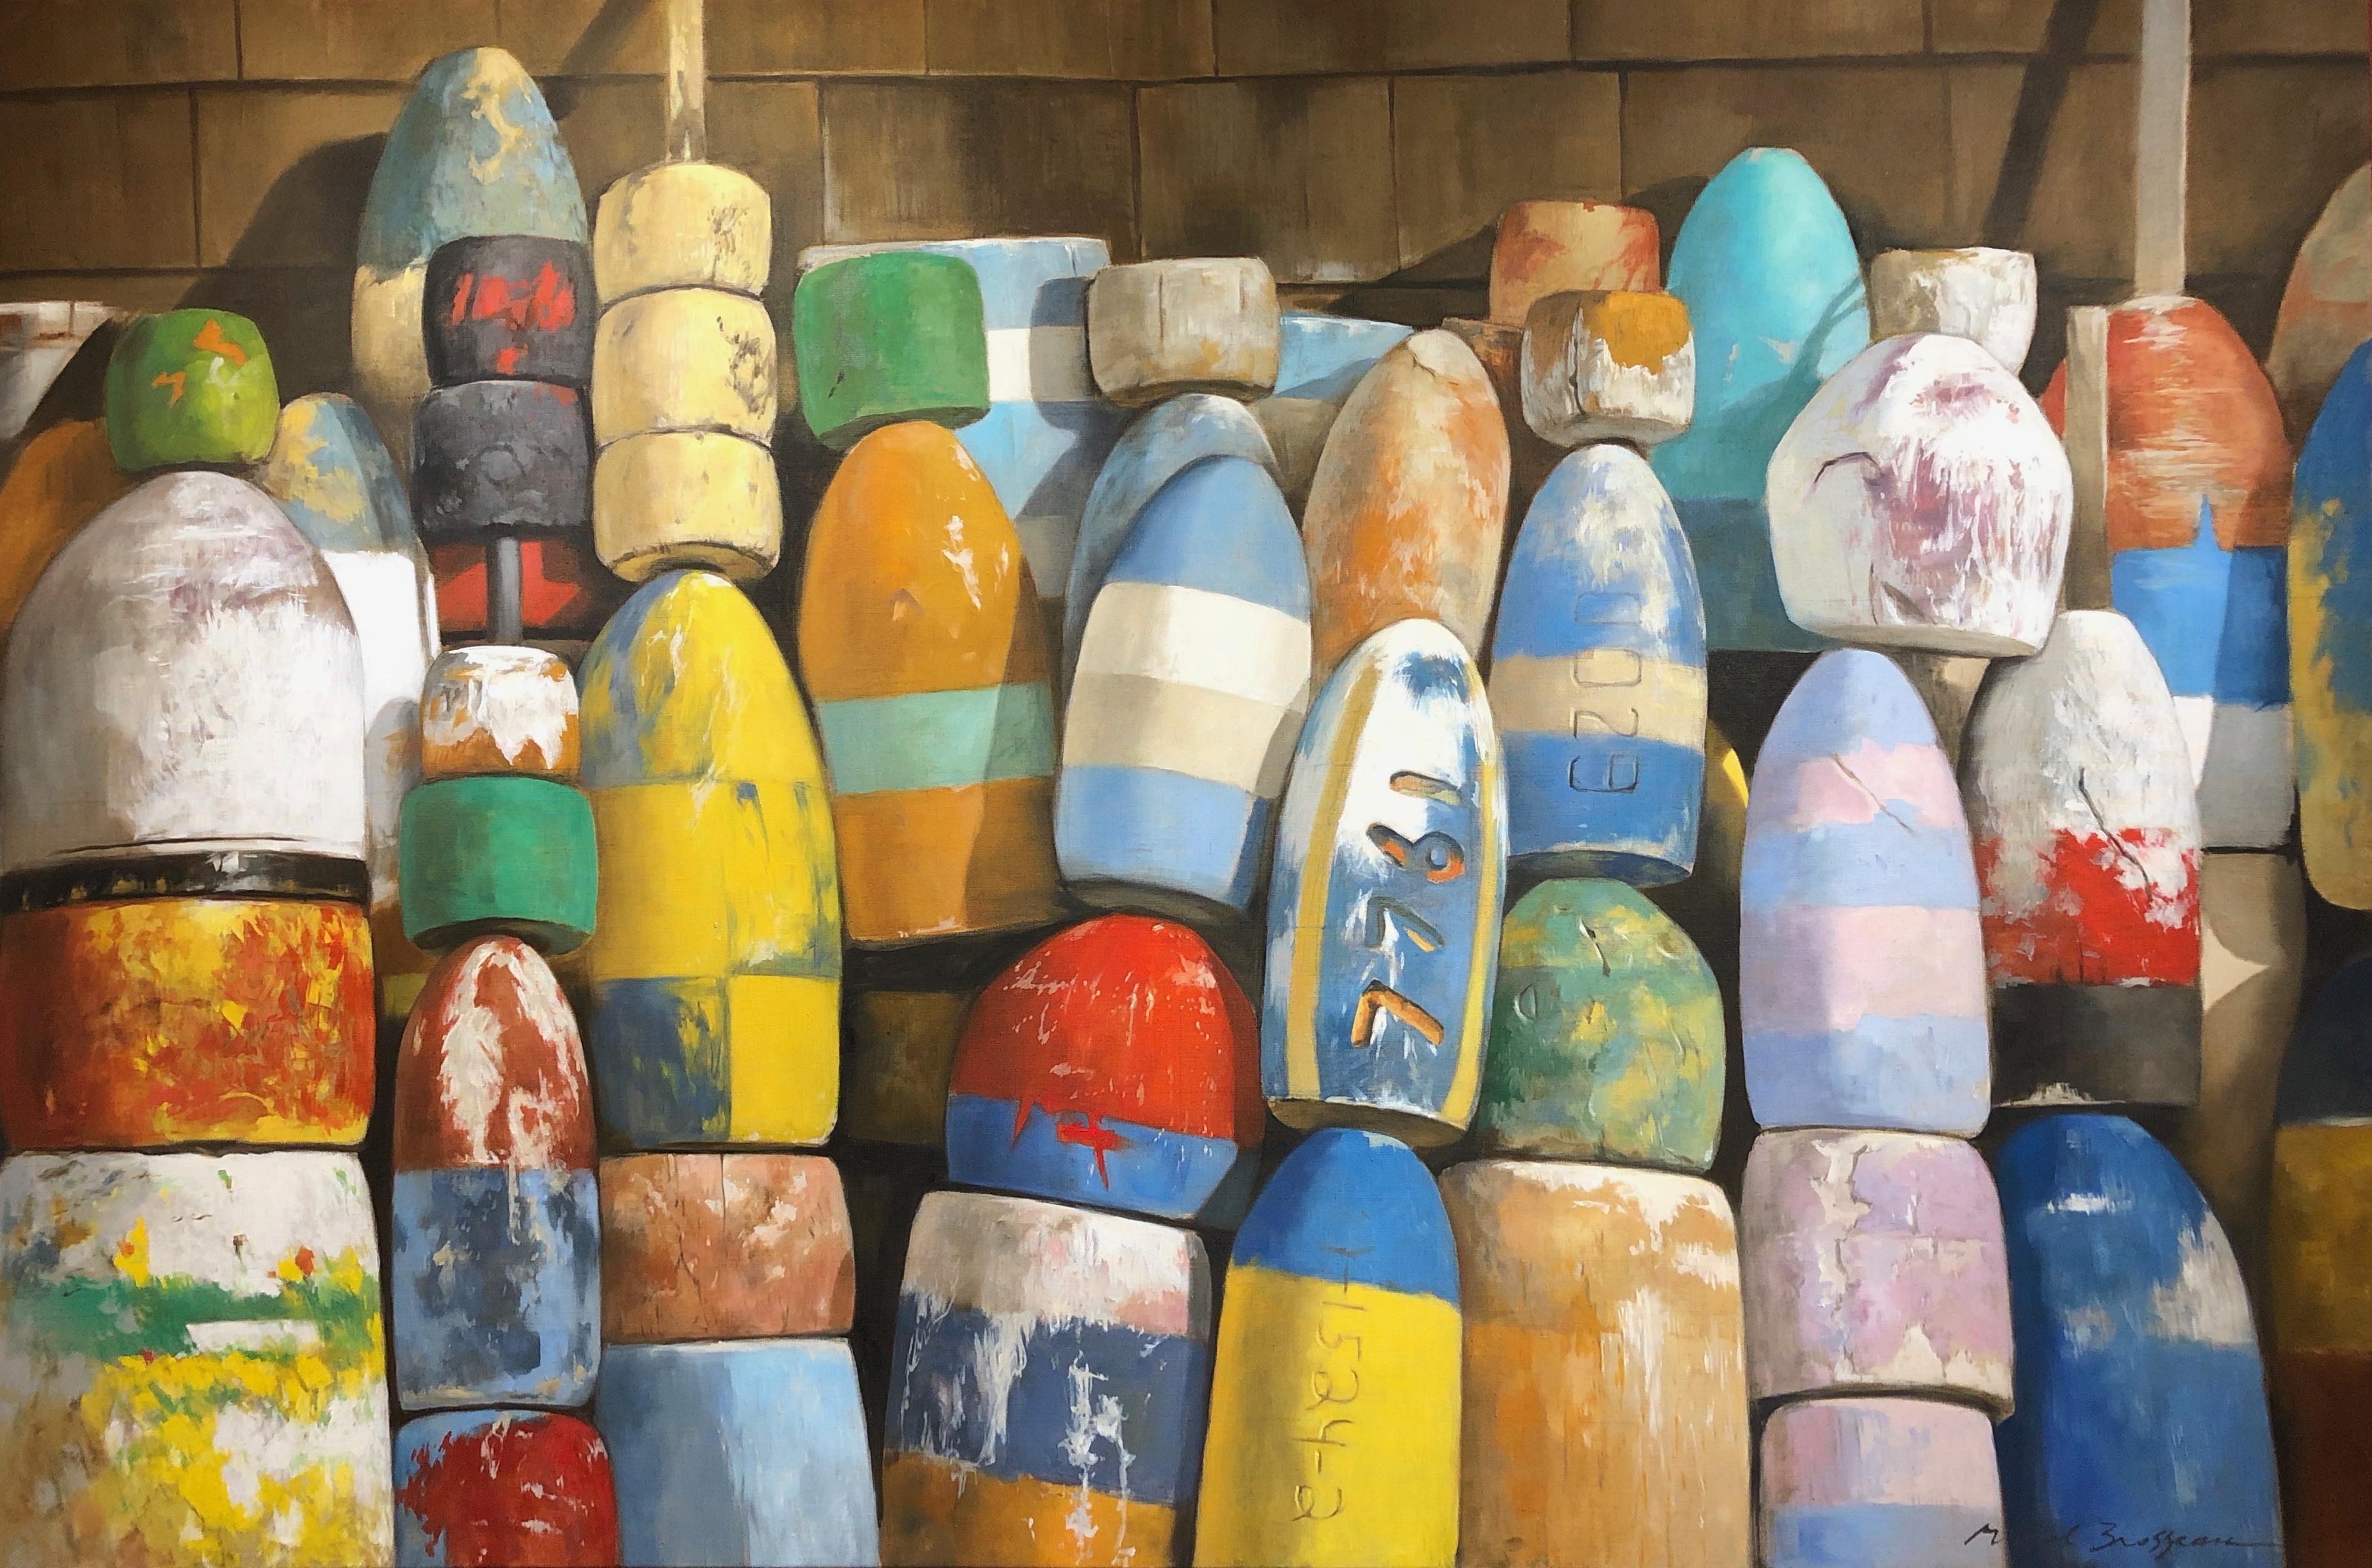 Michel Brosseau Still-Life Painting - "Crayola" photorealistic oil painting of colorful buoys against shingles